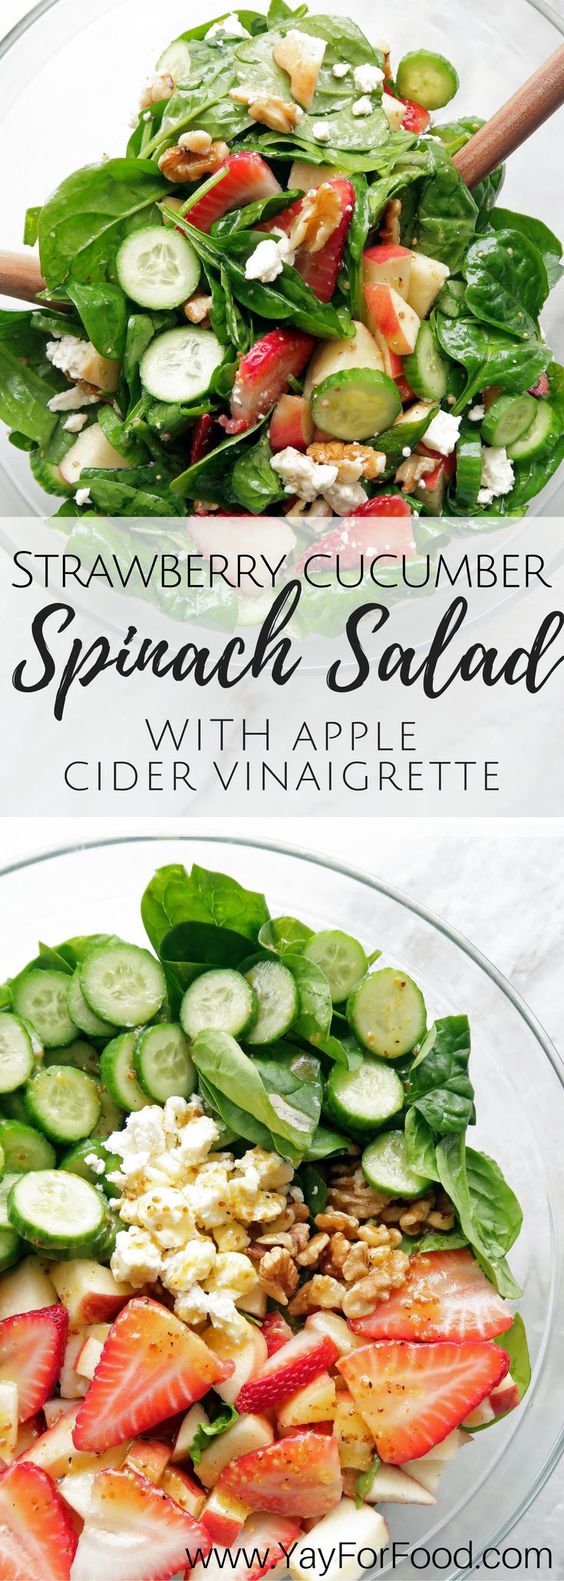 A healthy and fresh spring salad that is filling enough to be a meal or a great side dish. A homemade apple cider vinaigrette brings this flavourful salad together!